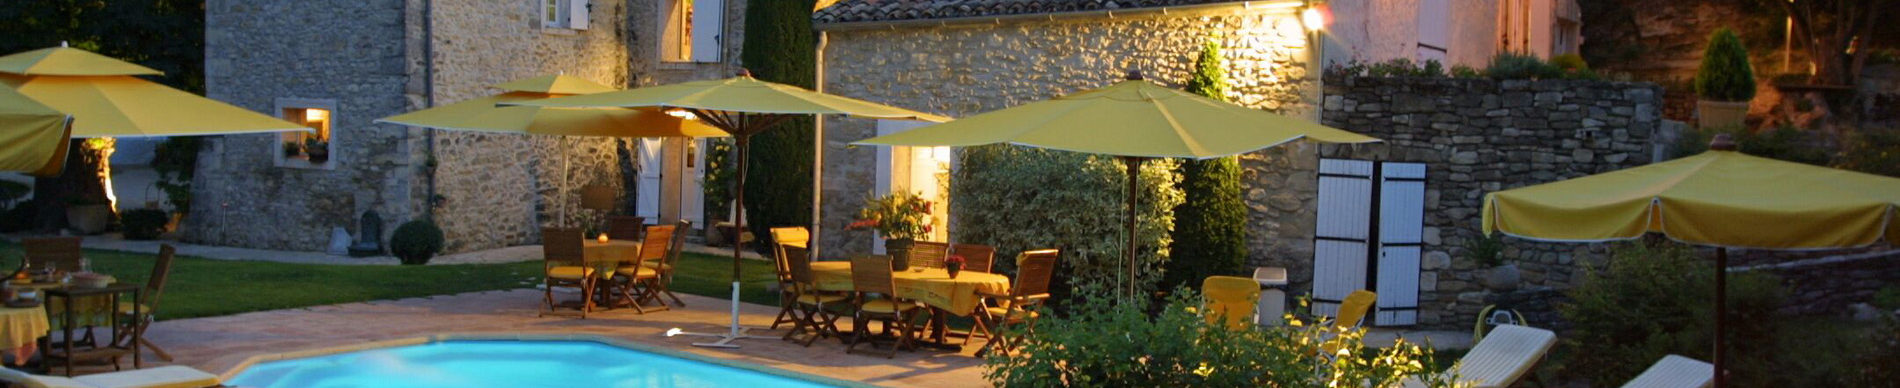 bed & breakfast Campagne st lazare Forcalquier